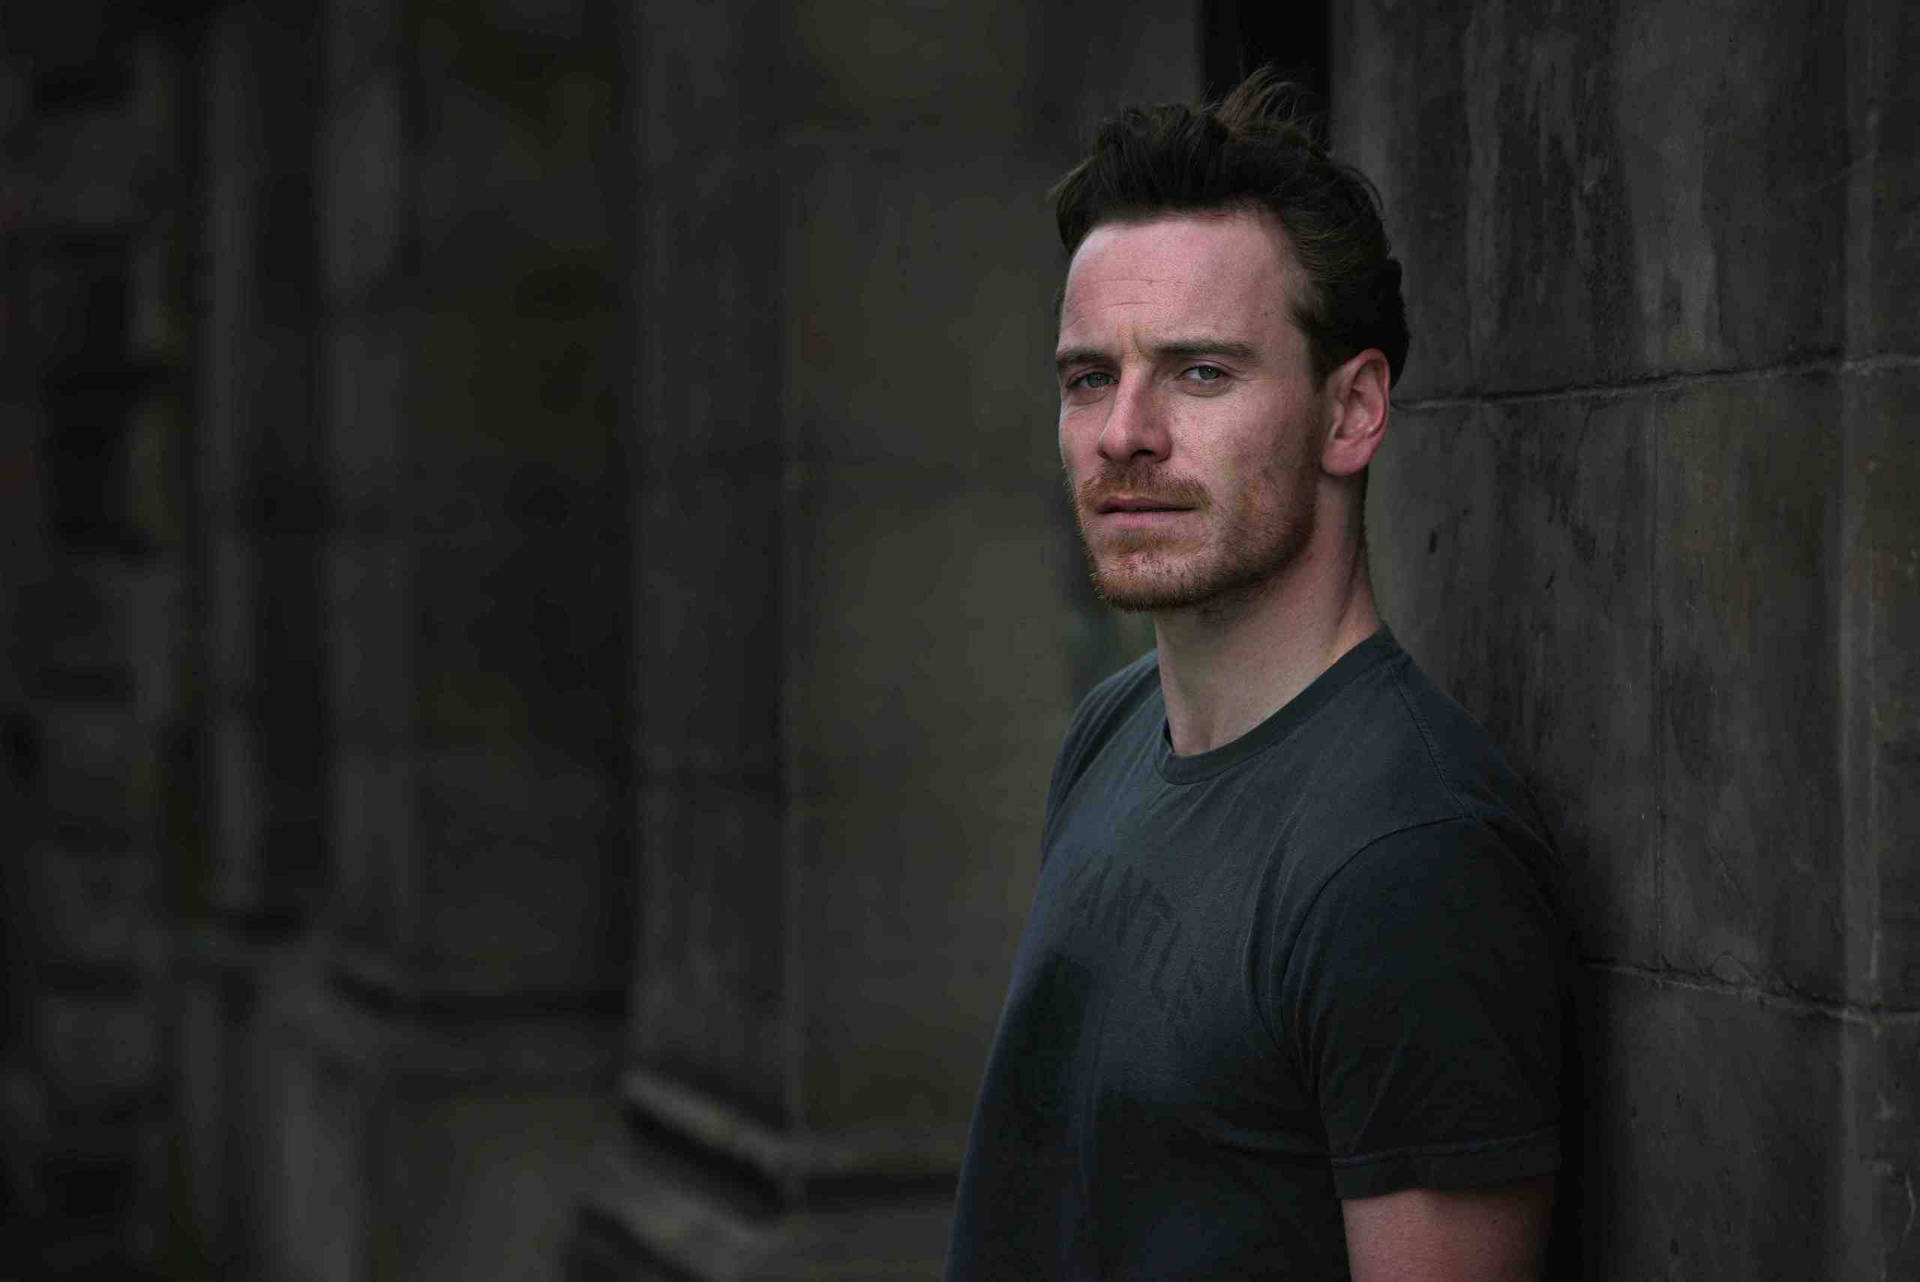 Casual Michael Fassbender Shoot Background